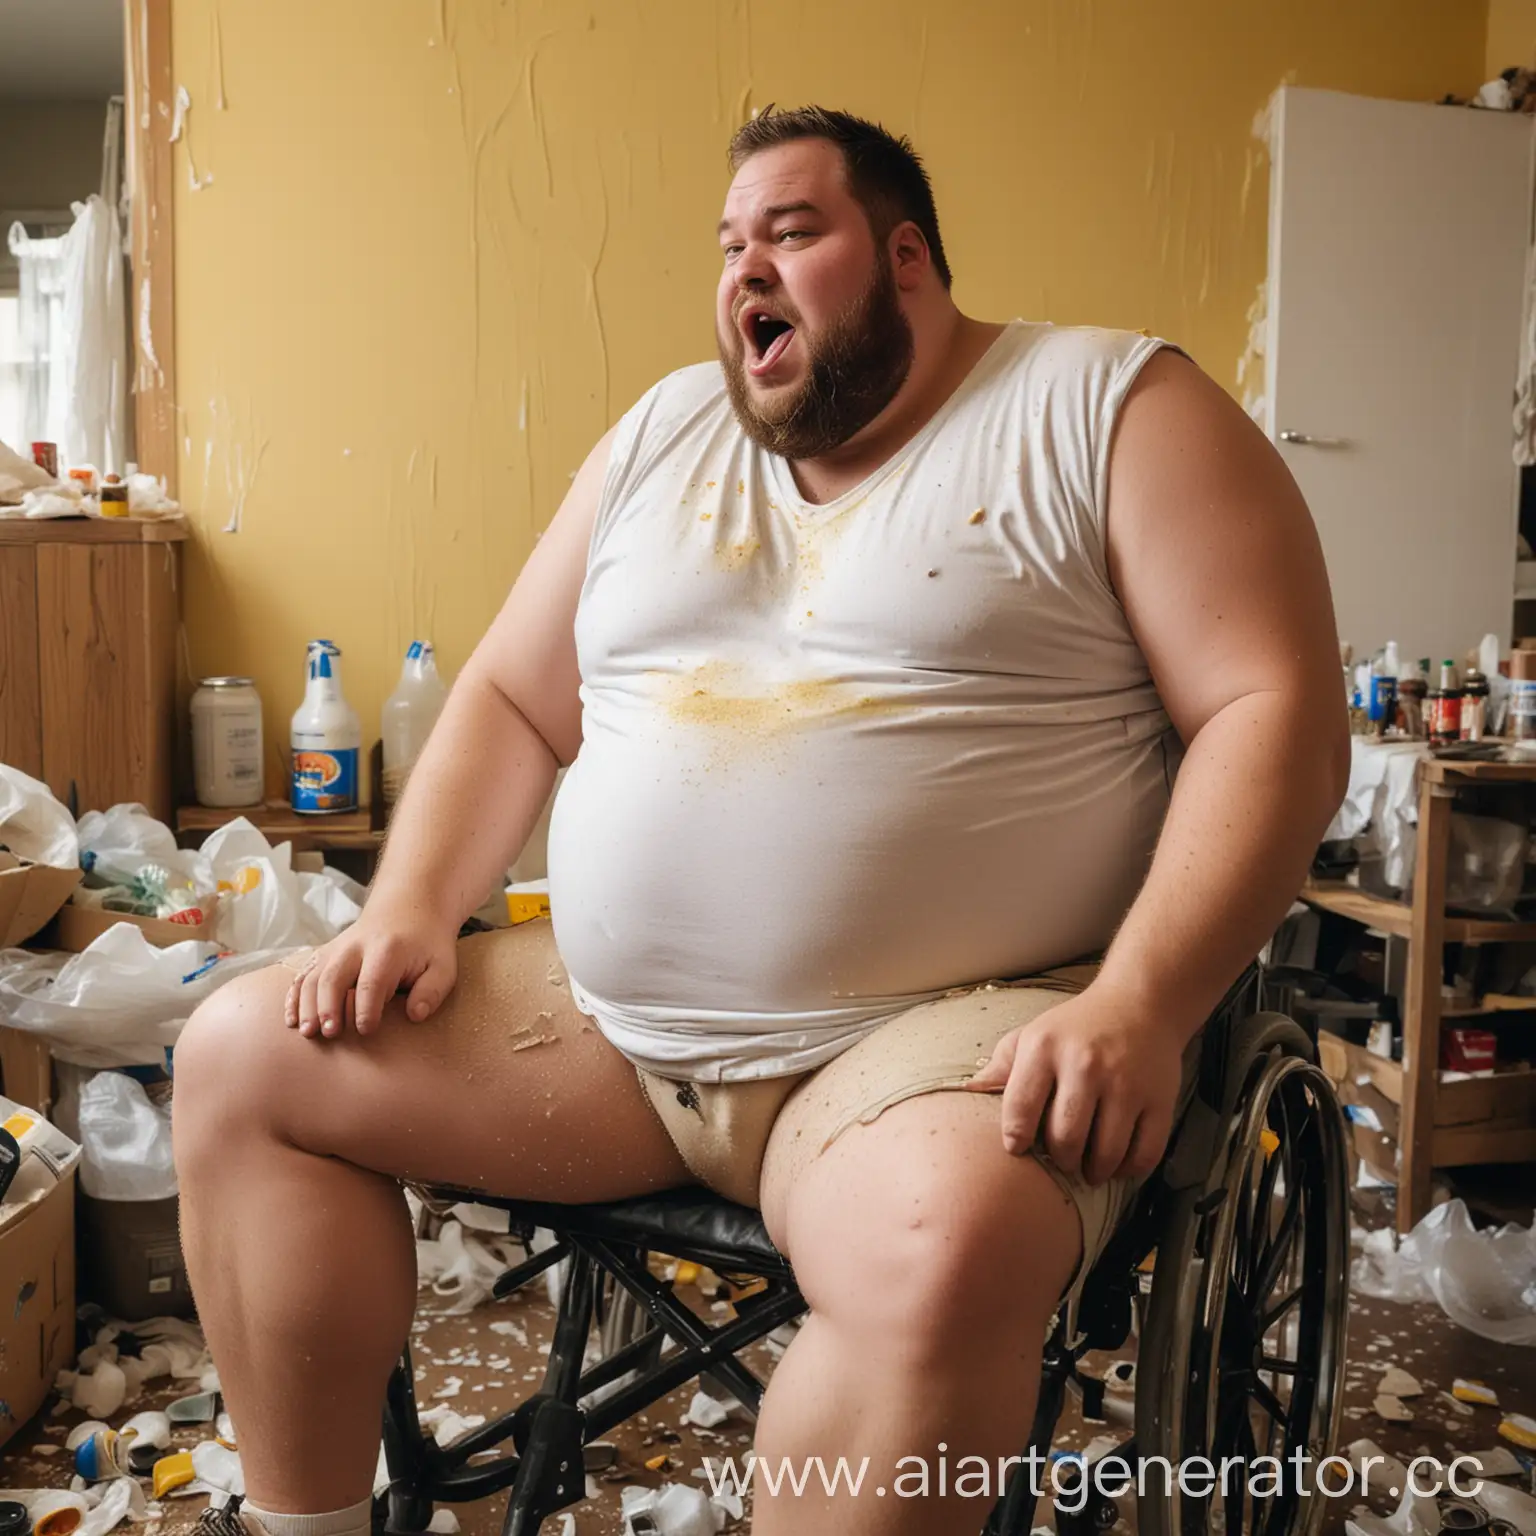 Obese-Man-in-Wheelchair-Surrounded-by-Trash-and-Beer